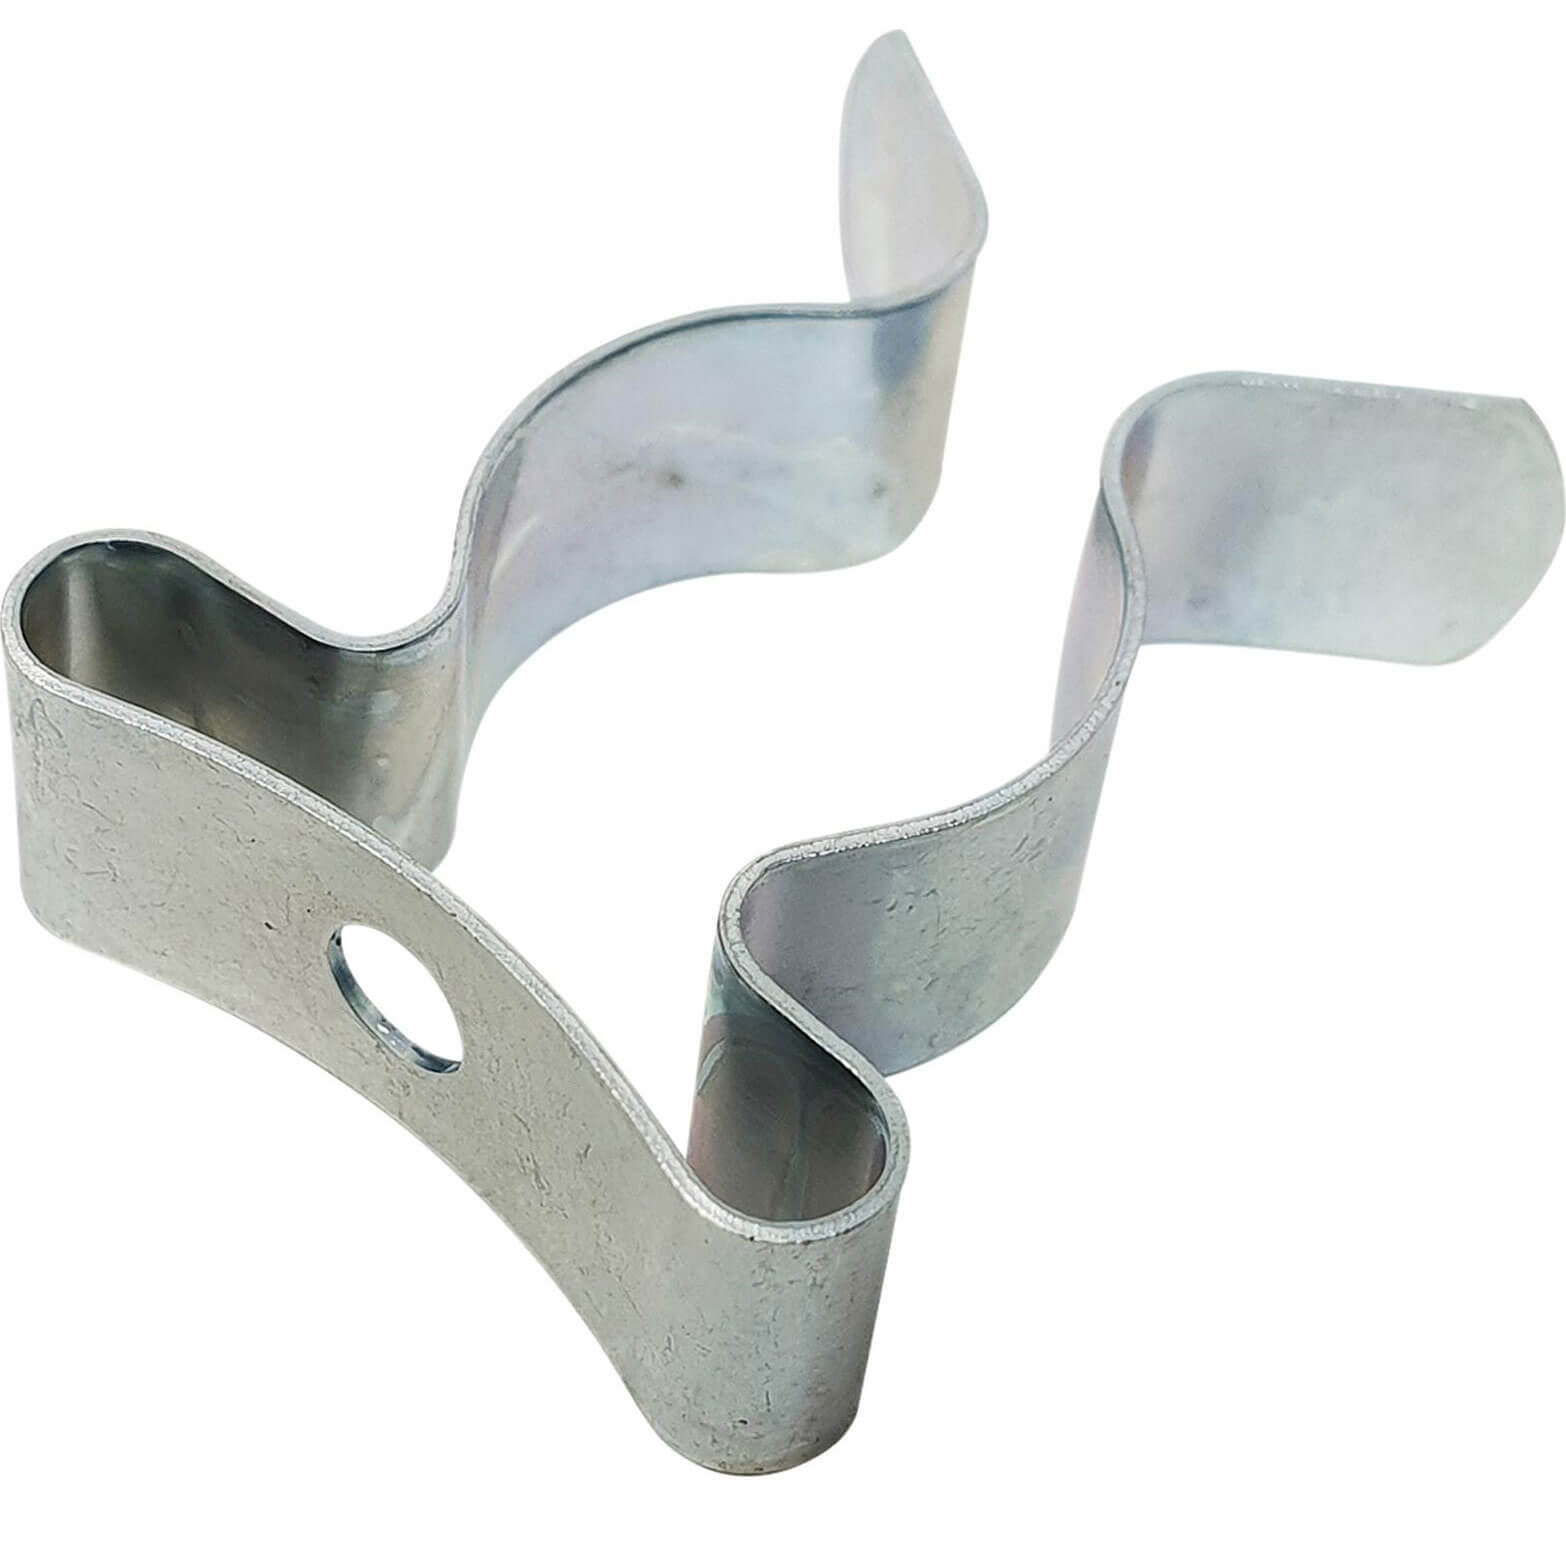 Image of Forgefix Zinc Plated Tool Clips 9.5mm Pack of 25